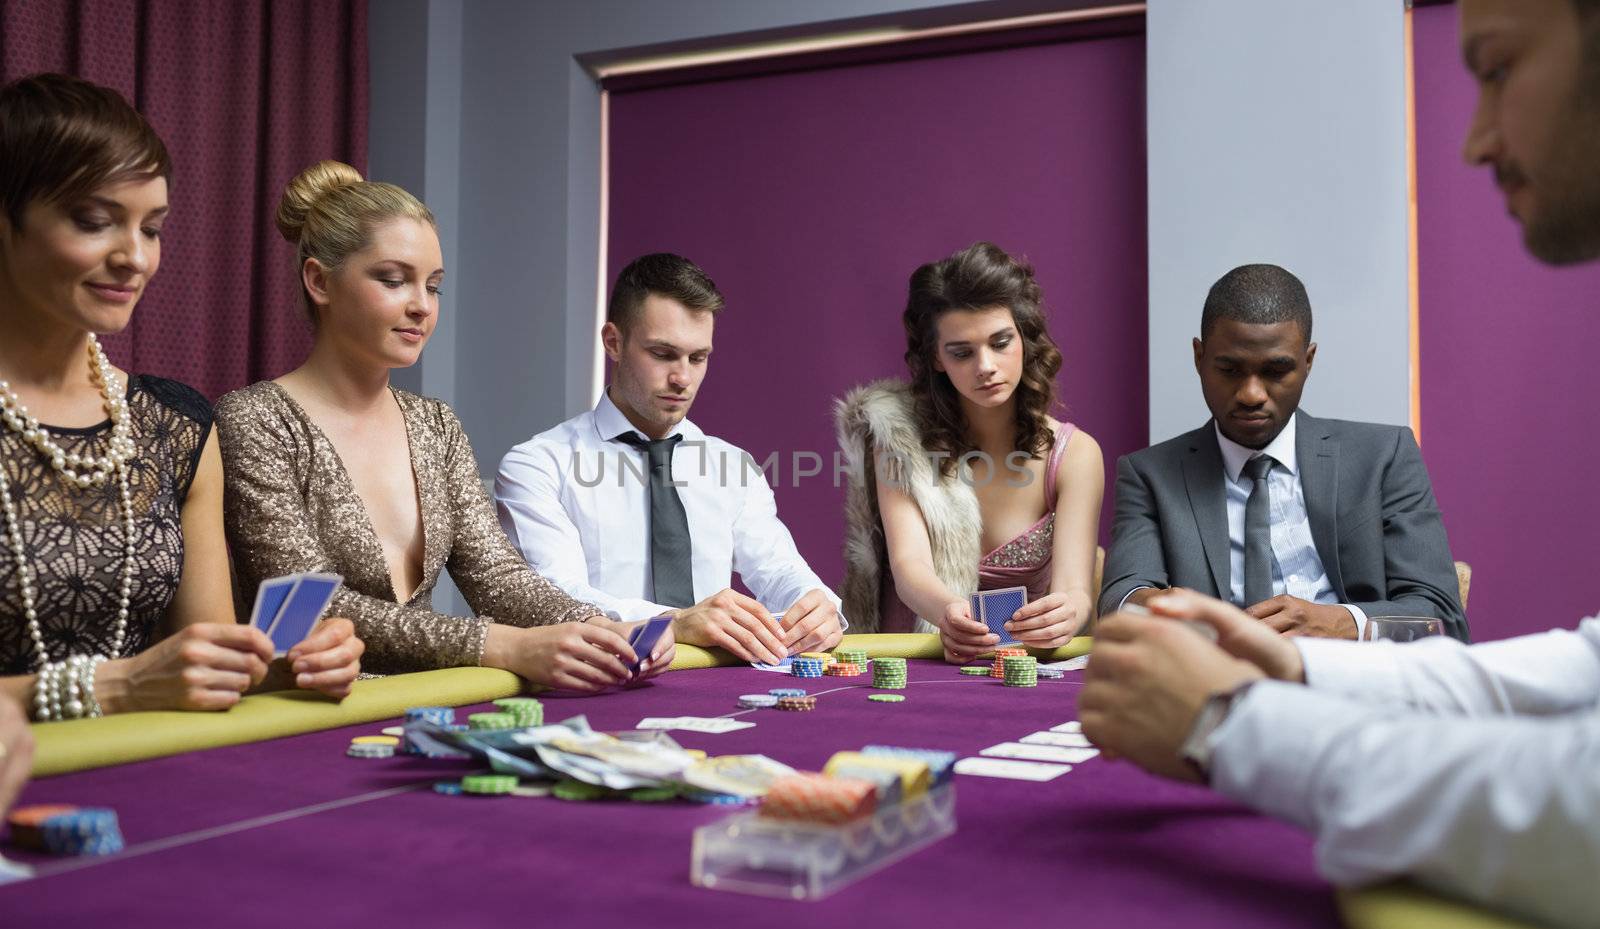 People at the poker table by Wavebreakmedia